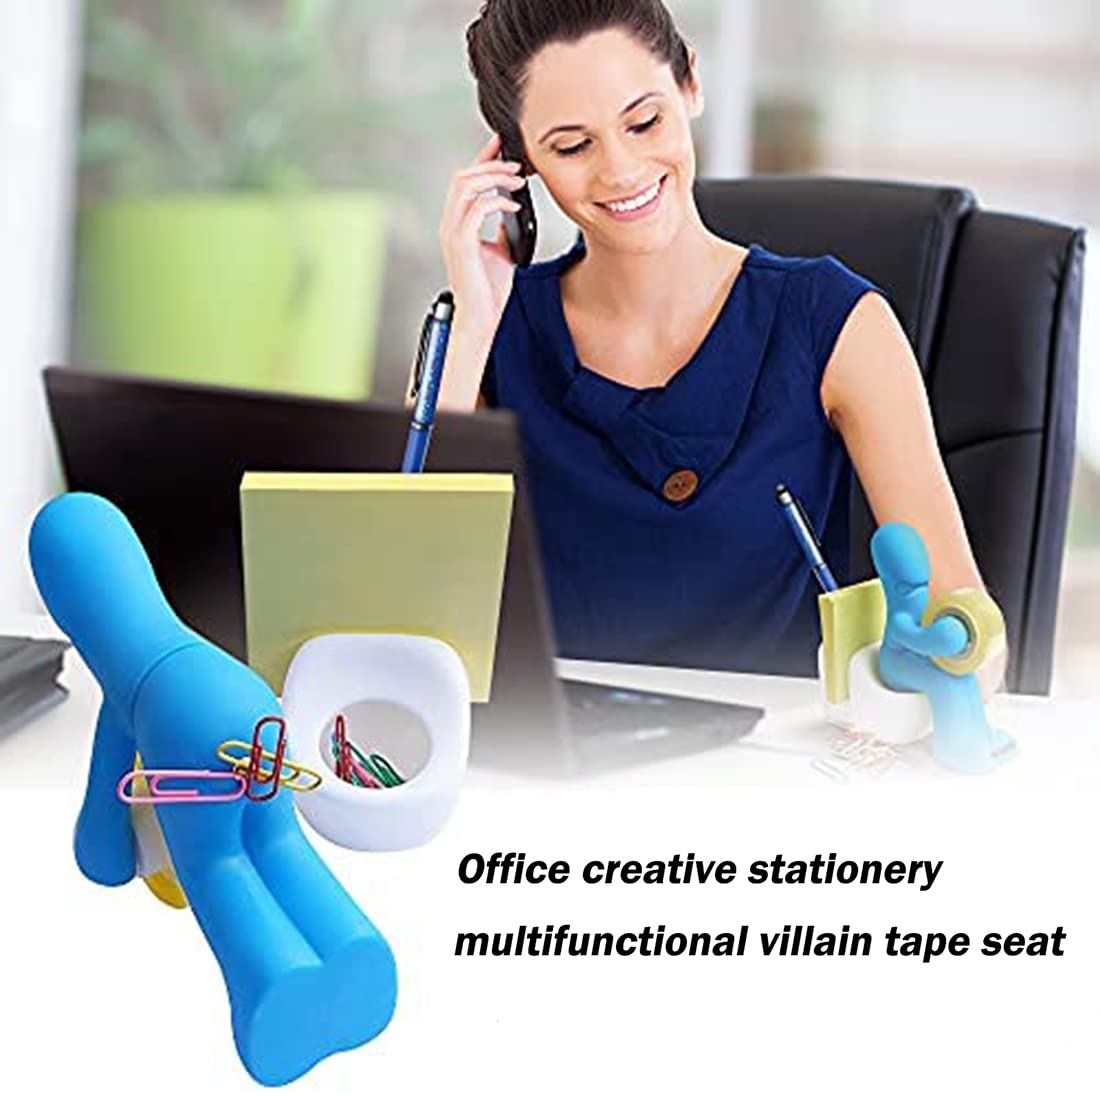 Tape Supply Station, KASTWAVE Multi-Functional Desk Accessories with Tape Dispenser, Includes Paper Clips, Funny Accessory for Office, Home or School(Blue)